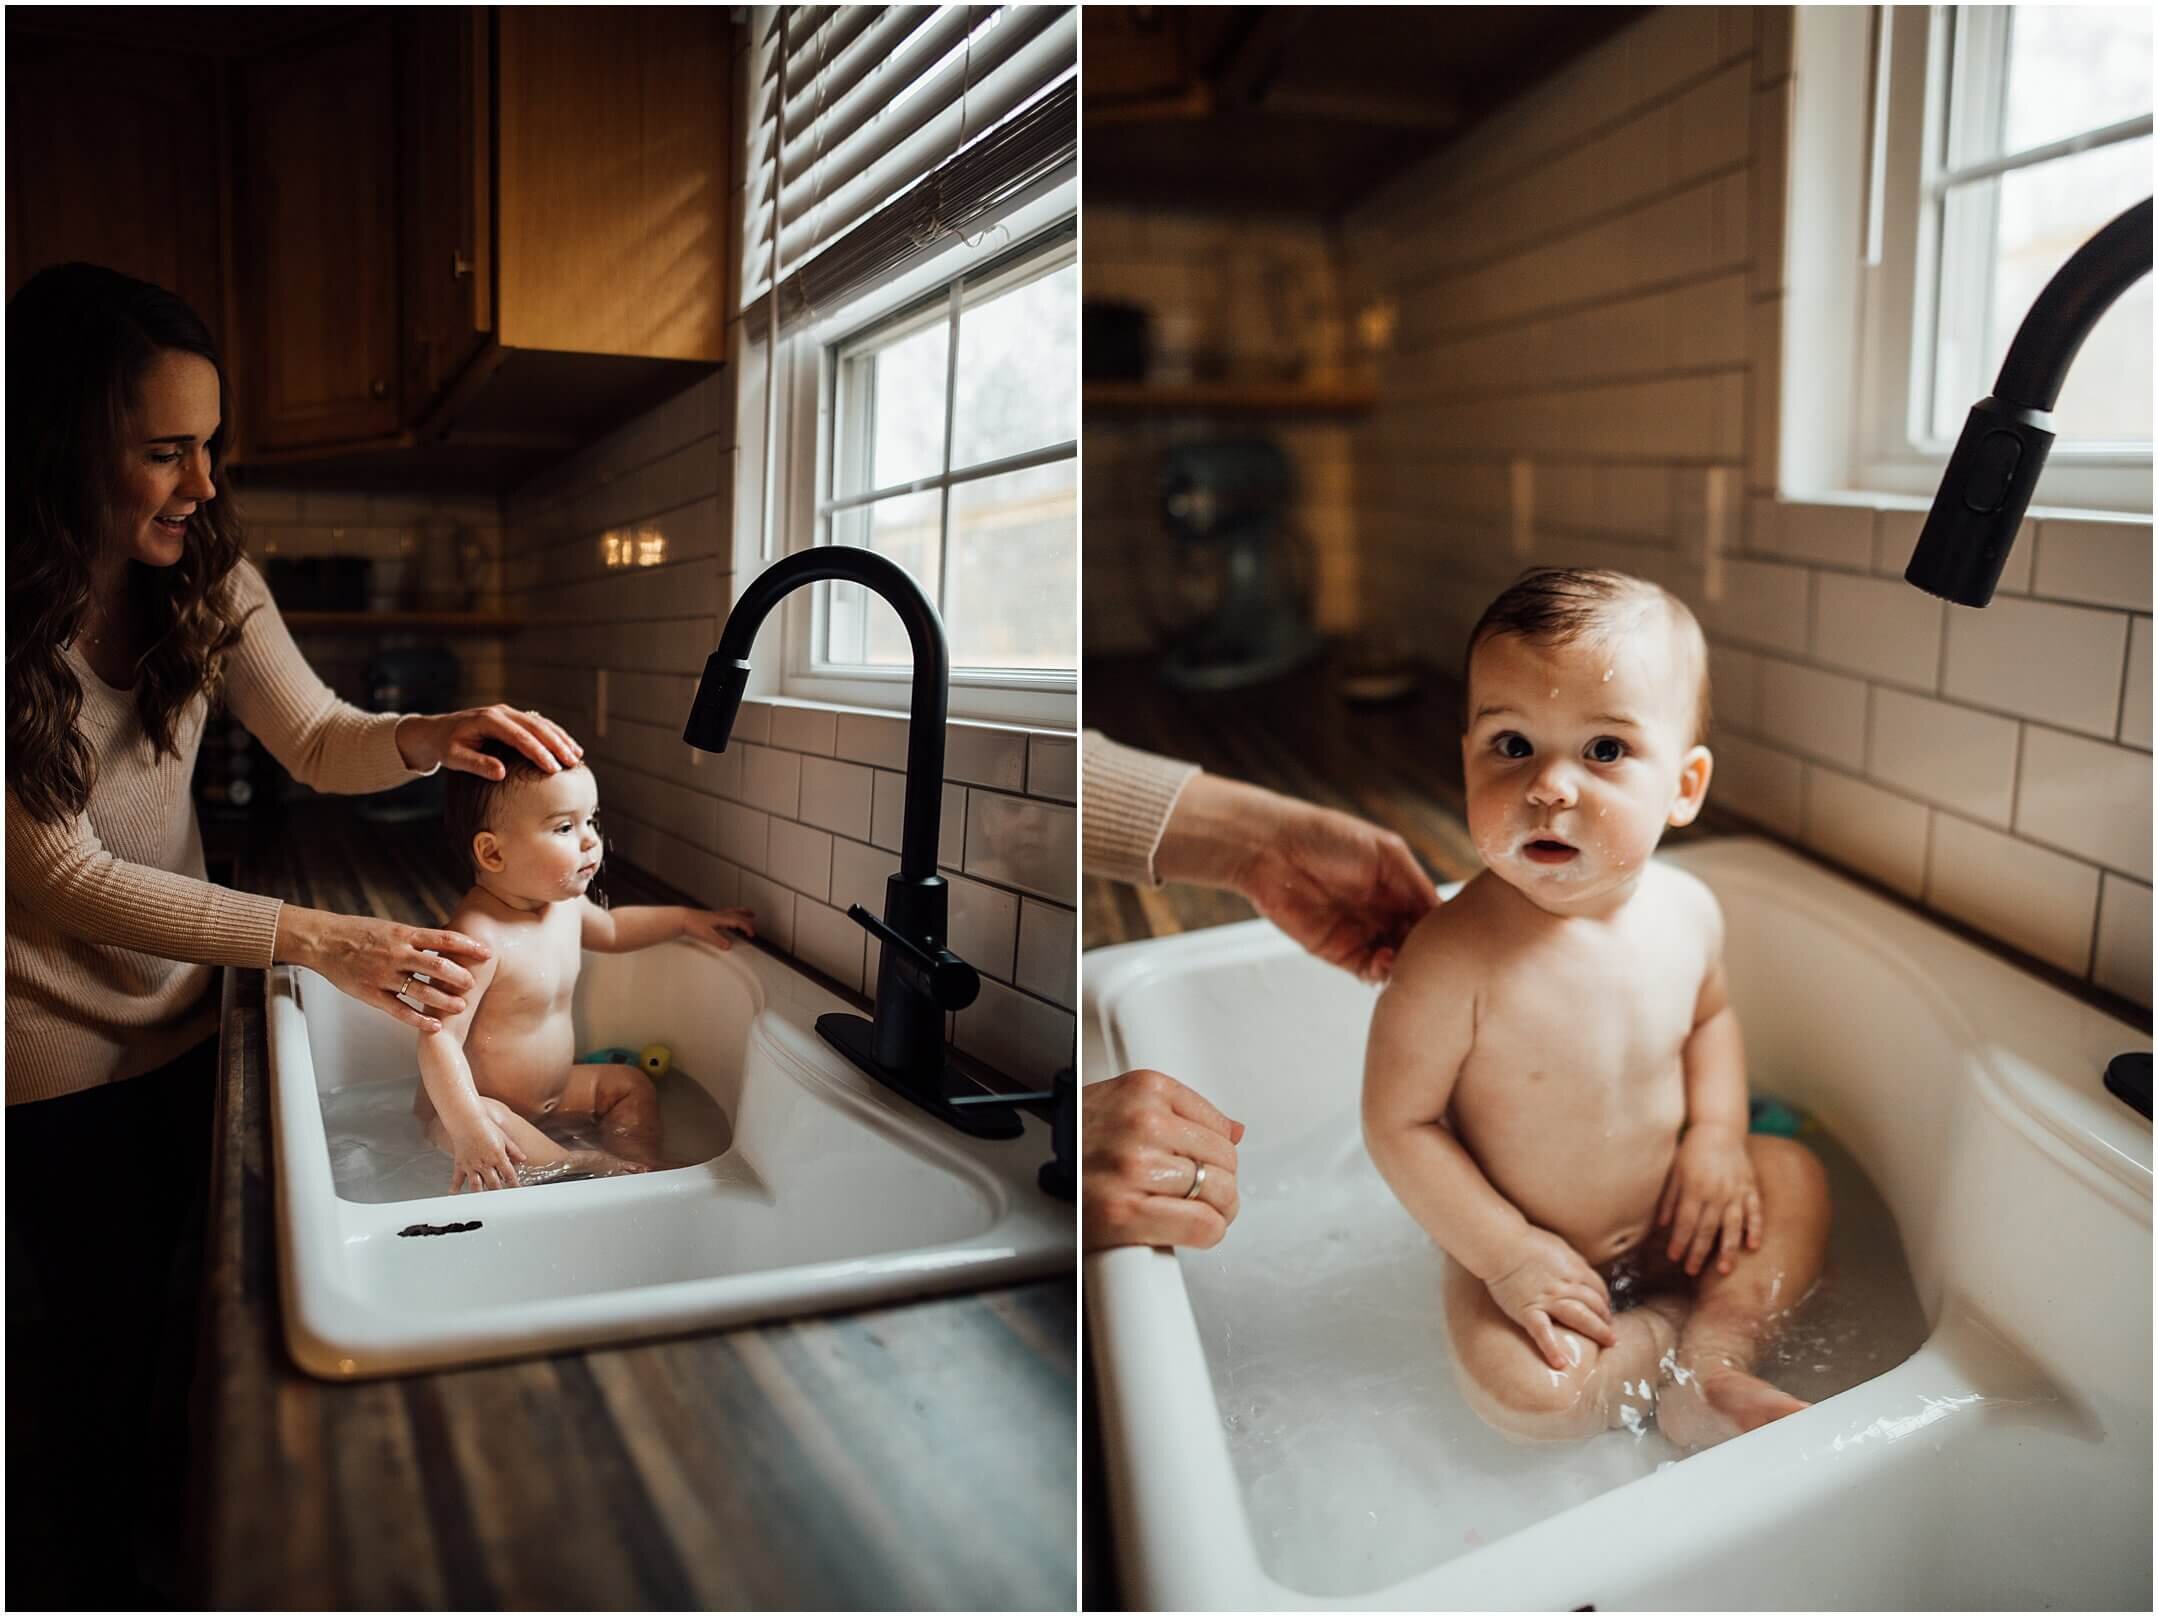 Kelly lovan photography | one year photos | sink bath | baby in a sink | family photography | lifestyle photography | kelly lovan photography